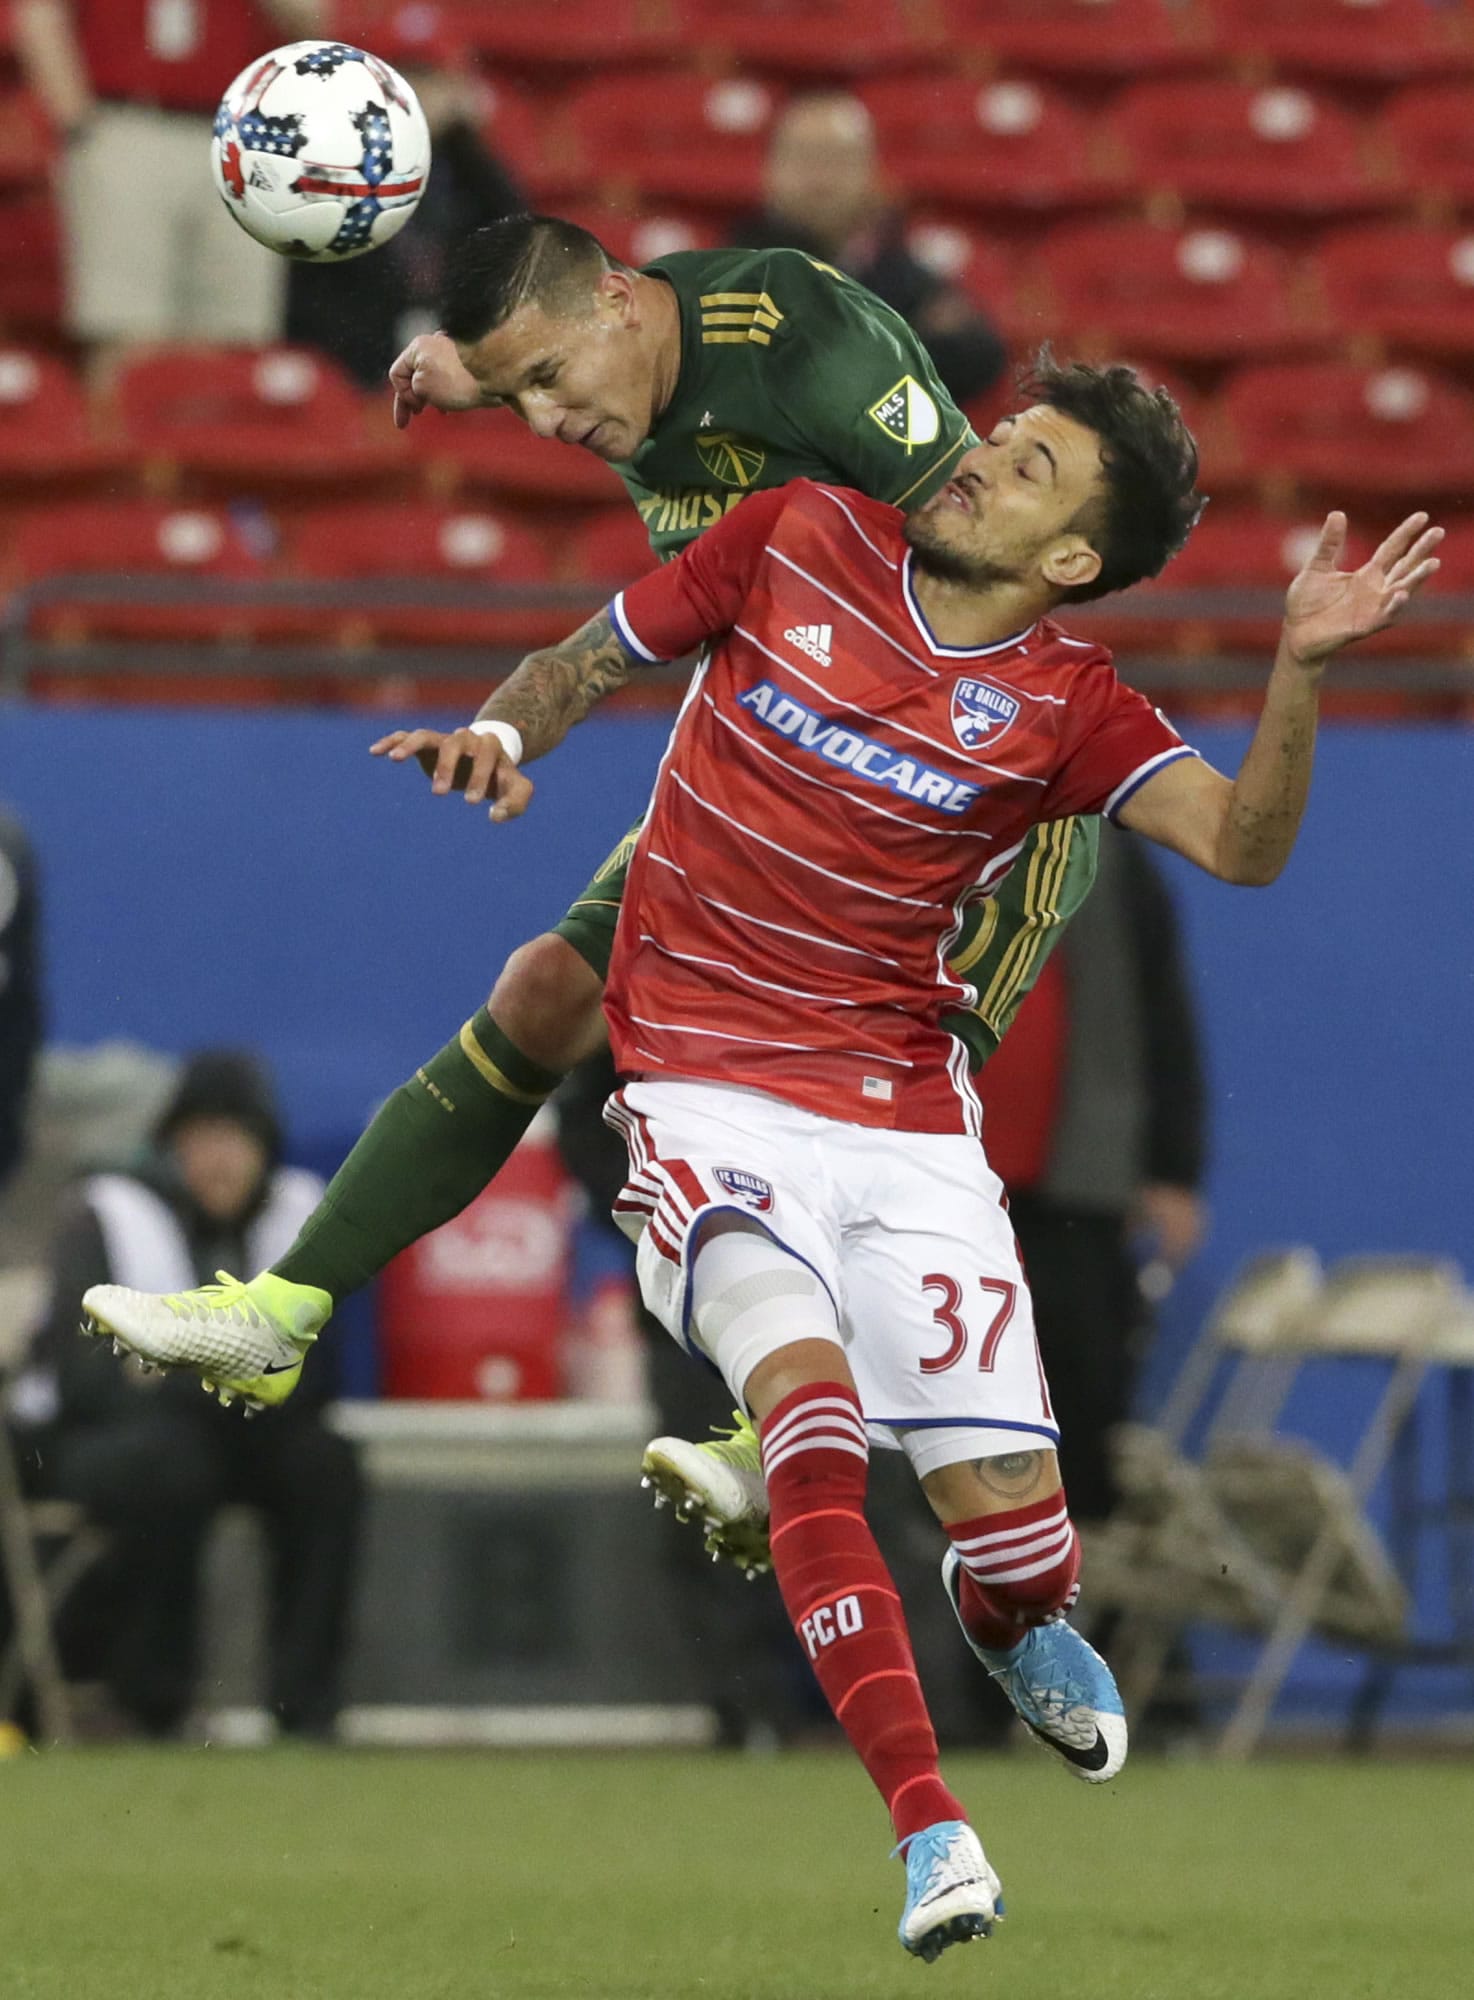 Portland Timbers midfielder David Guzman, left, and FC Dallas forward Maximiliano Urruti (37) vie for control of the ball during the first half of an MLS soccer match in Frisco, Texas, Saturday, April 29, 2017.